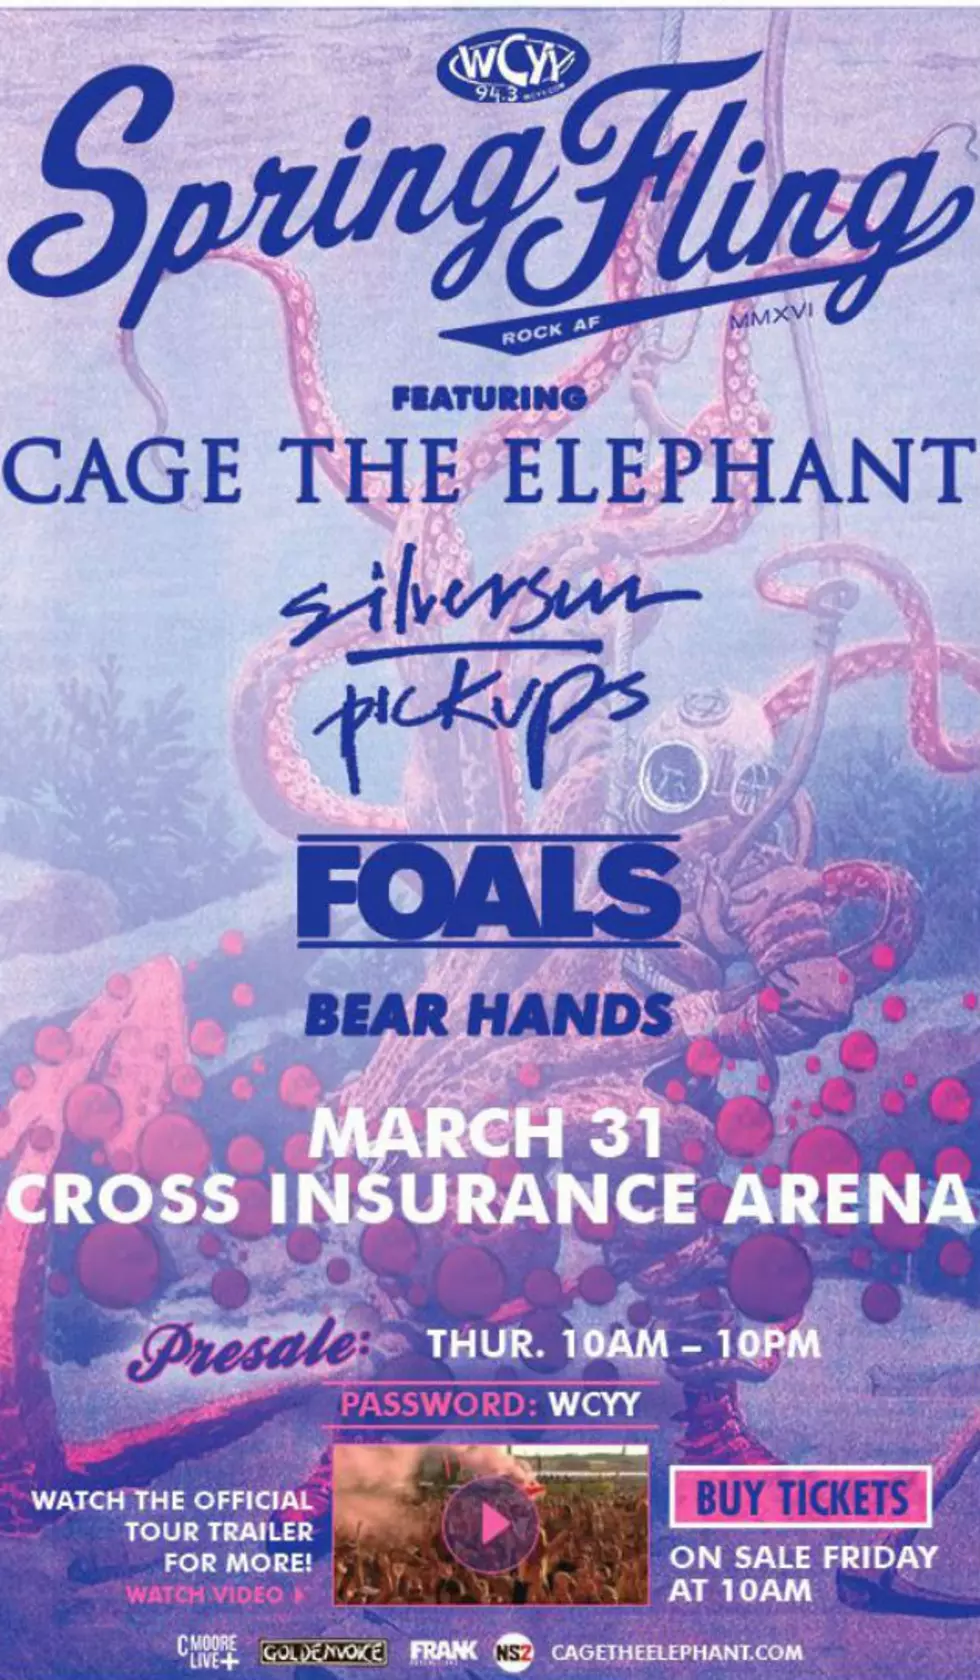 CYY Spring Fling Featuring Cage the Elephant and More! Pre-Sale Tickets Are on Sale Now Until 10pm Tonight (Thursday)